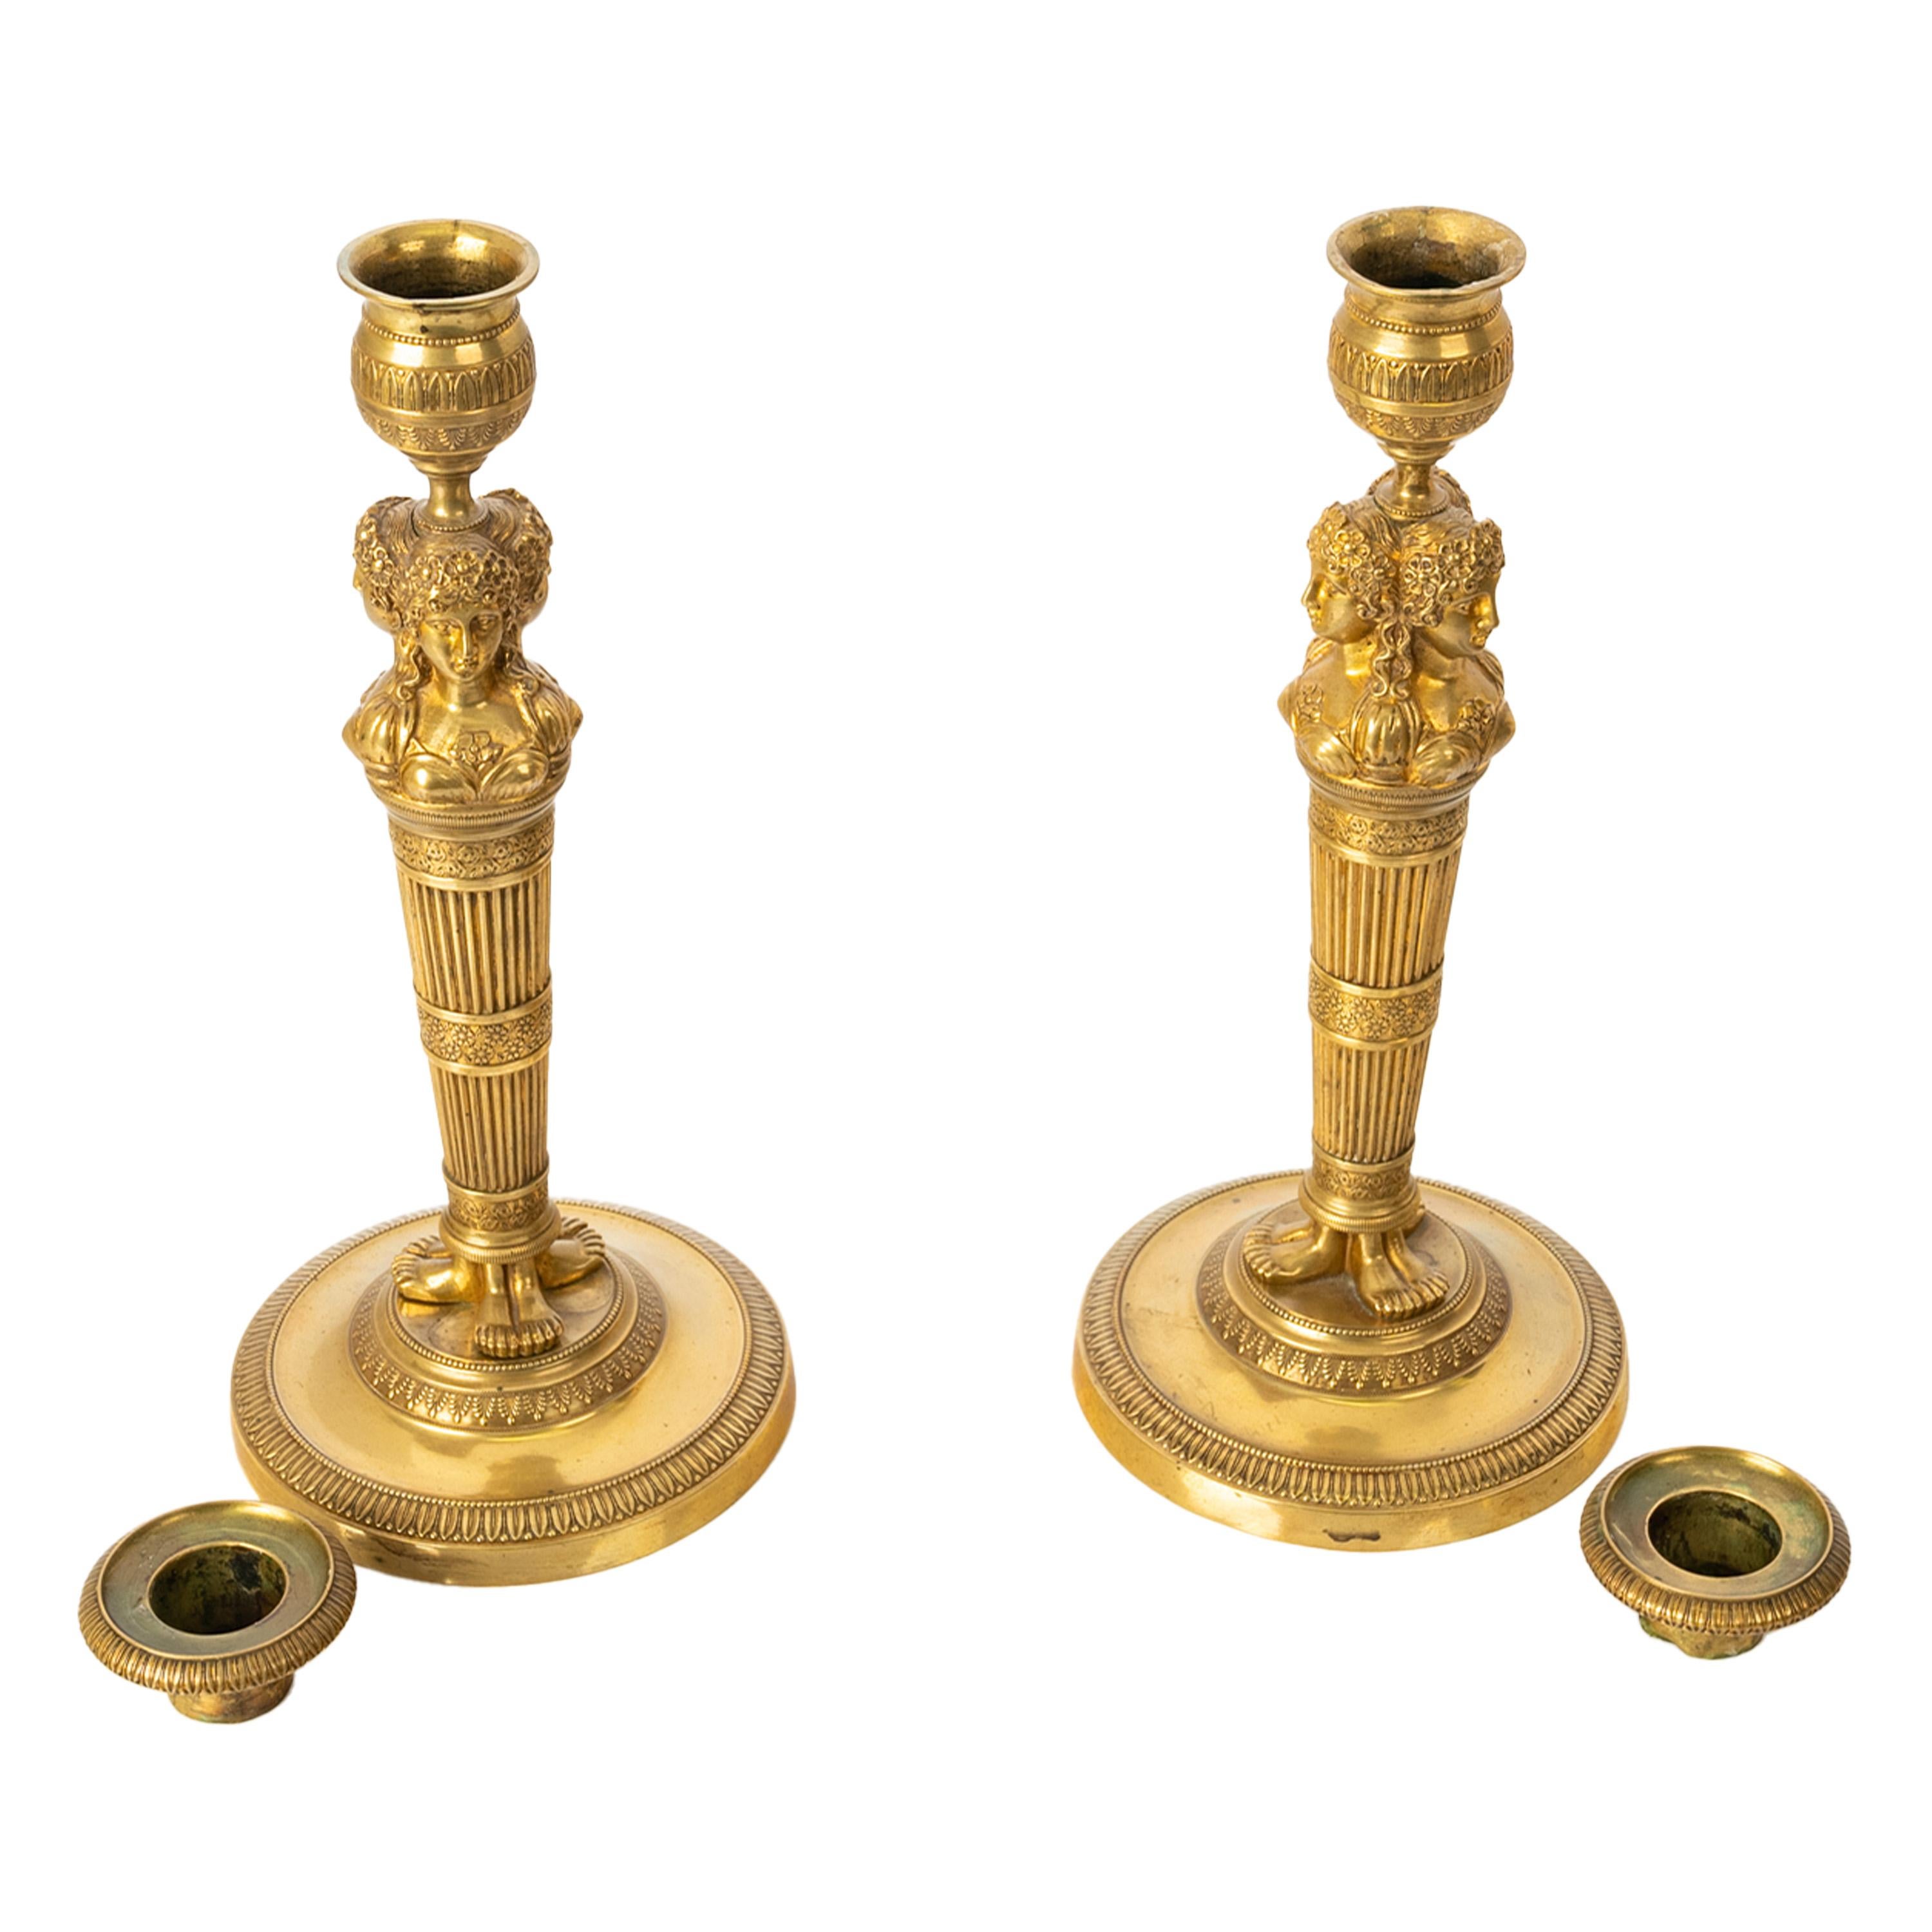 Pair Antique Early 19thC French Empire Neoclassical Gilt Bronze Candlesticks For Sale 5